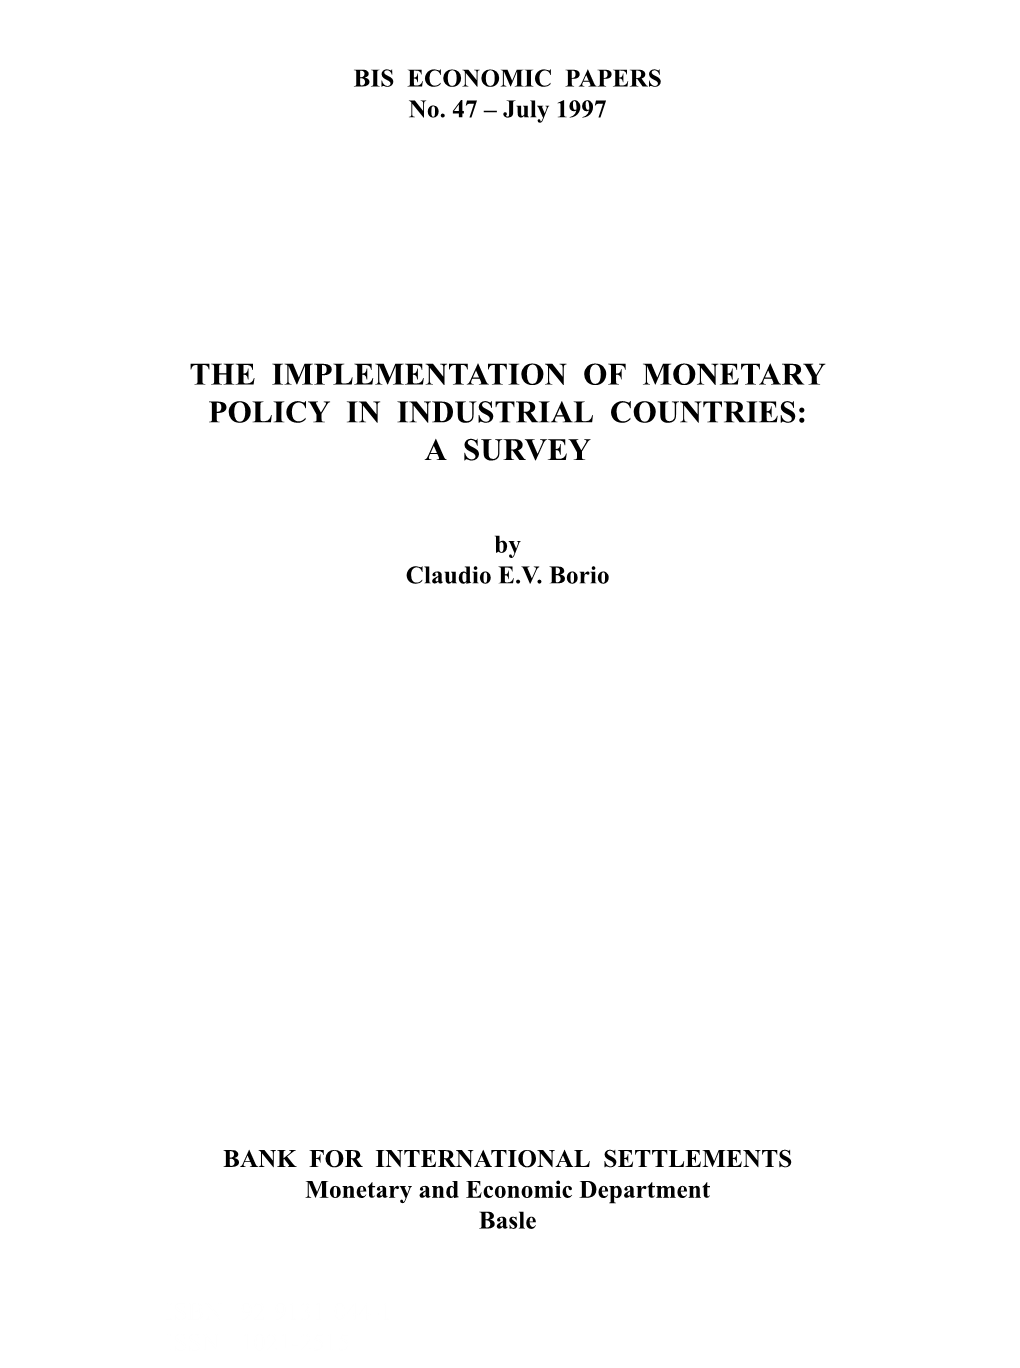 The Implementation of Monetary Policy in Industrial Countries: a Survey